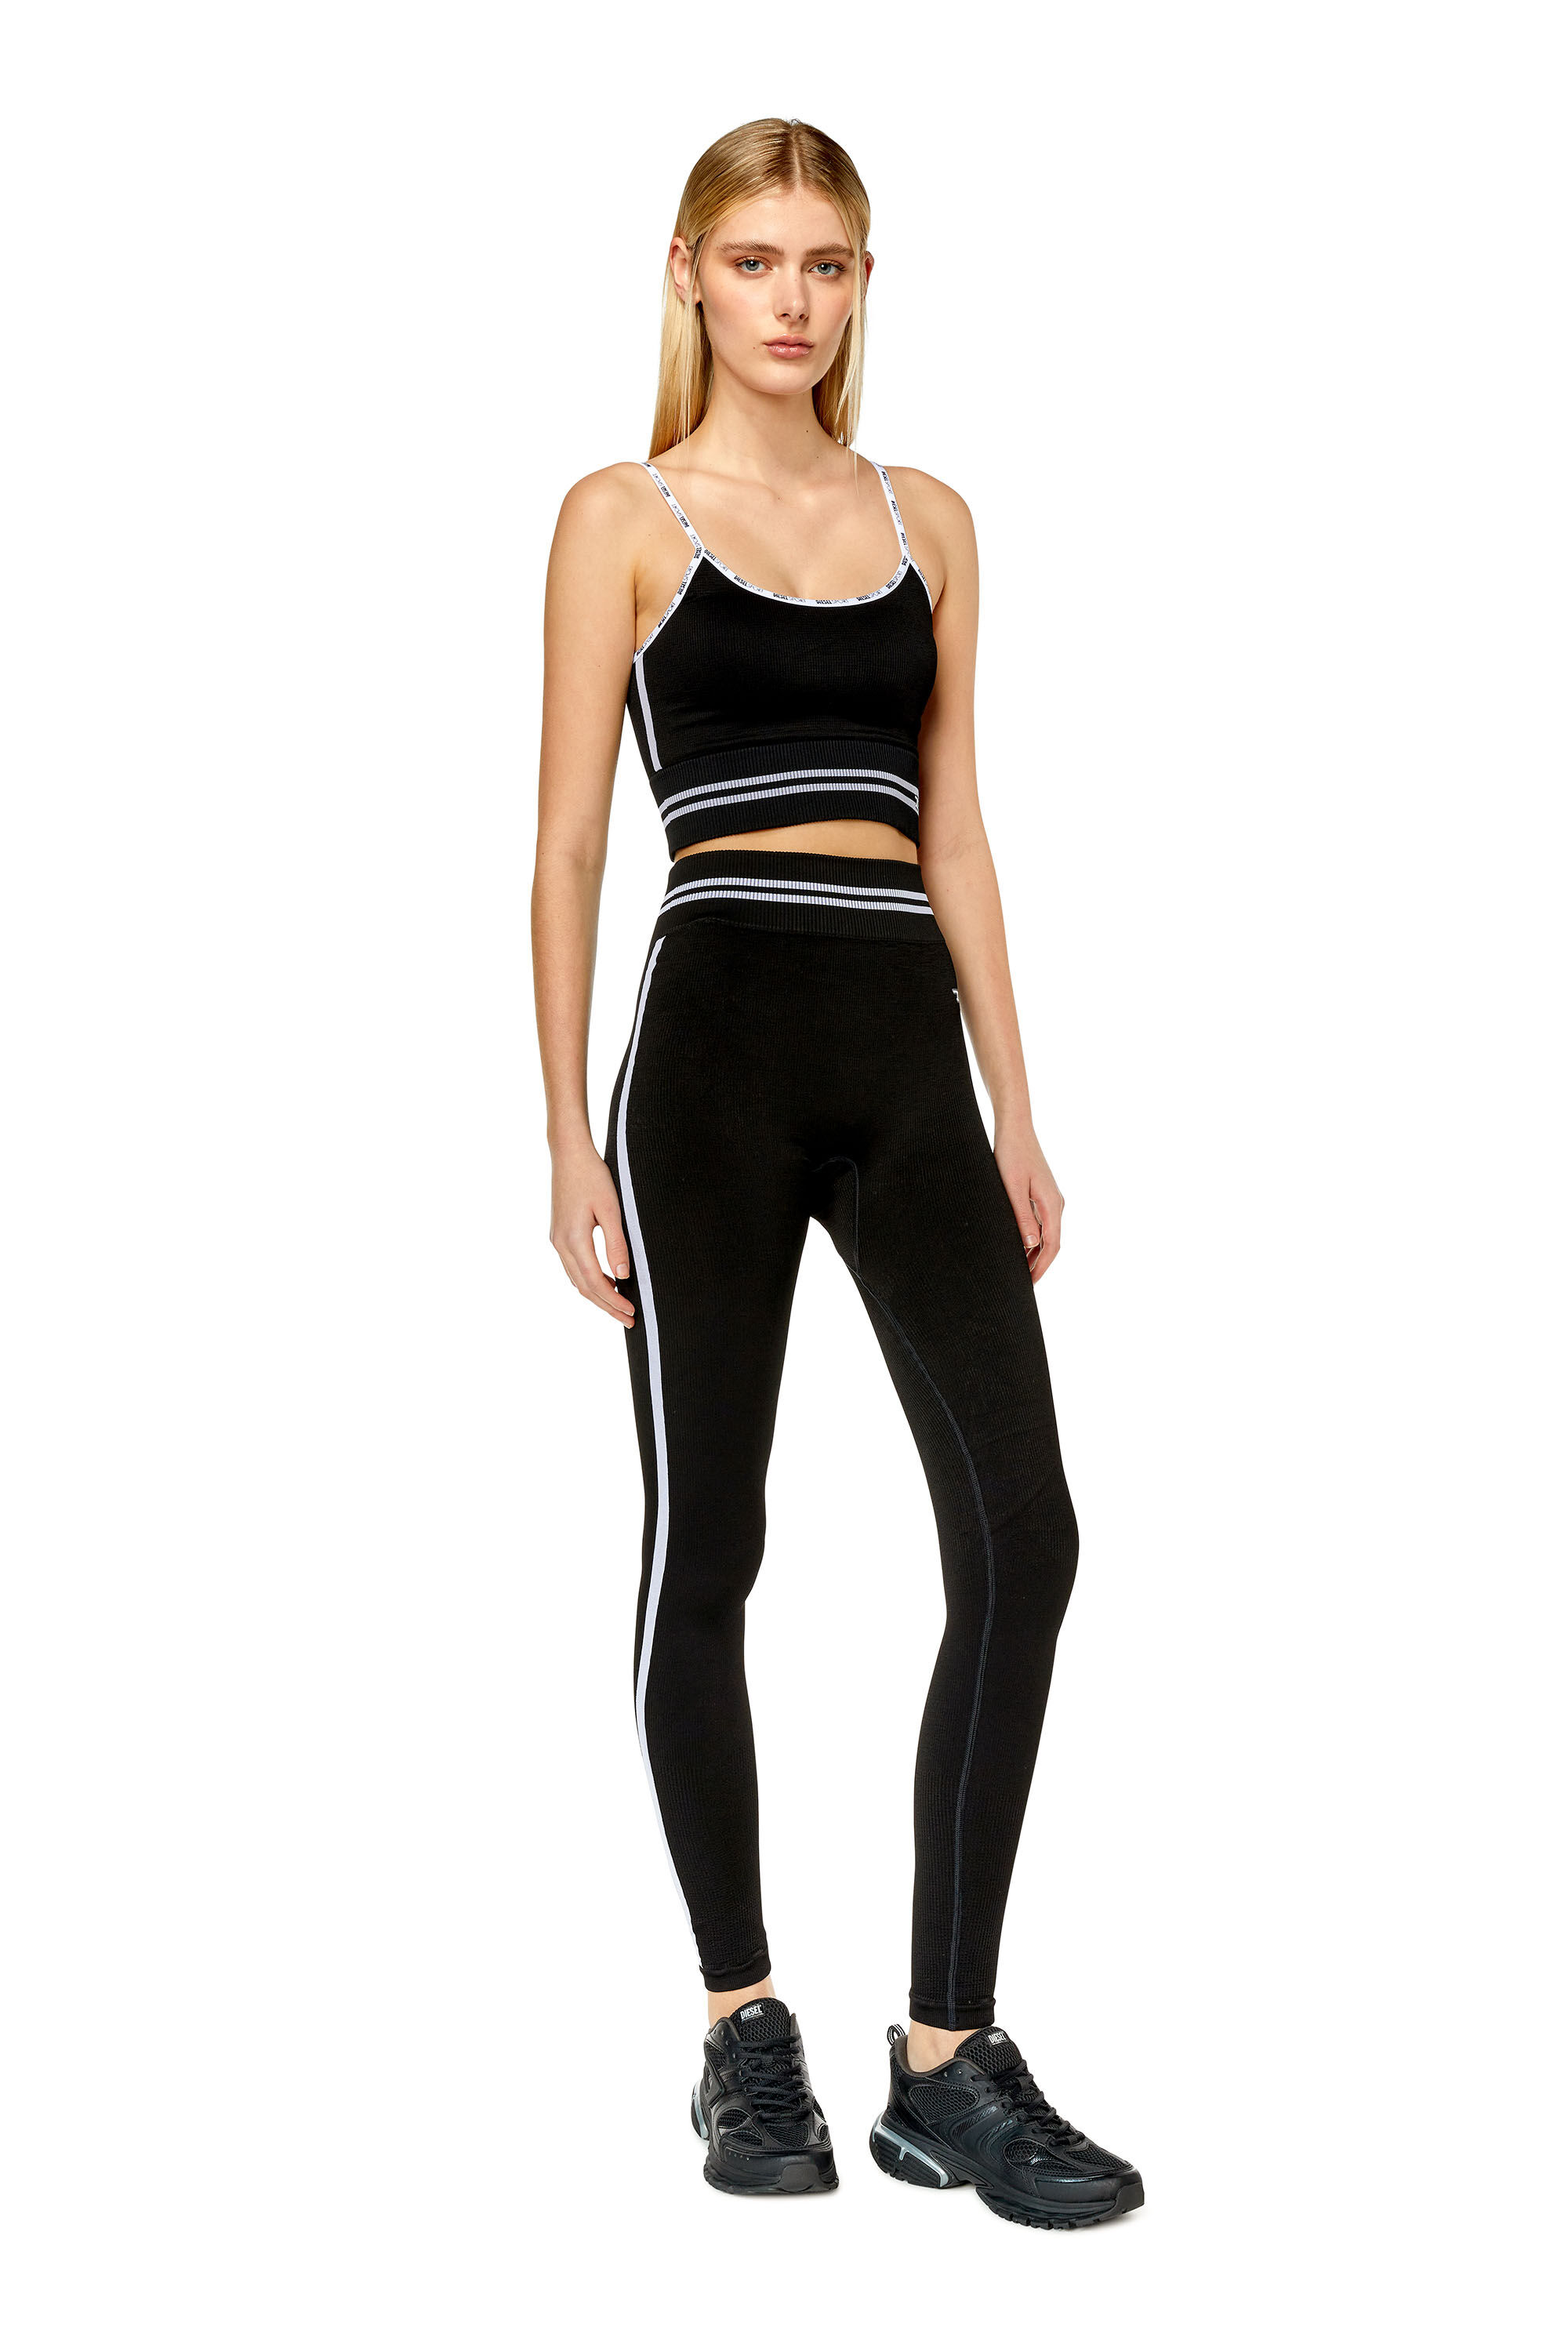 Diesel Activewear for Women for sale